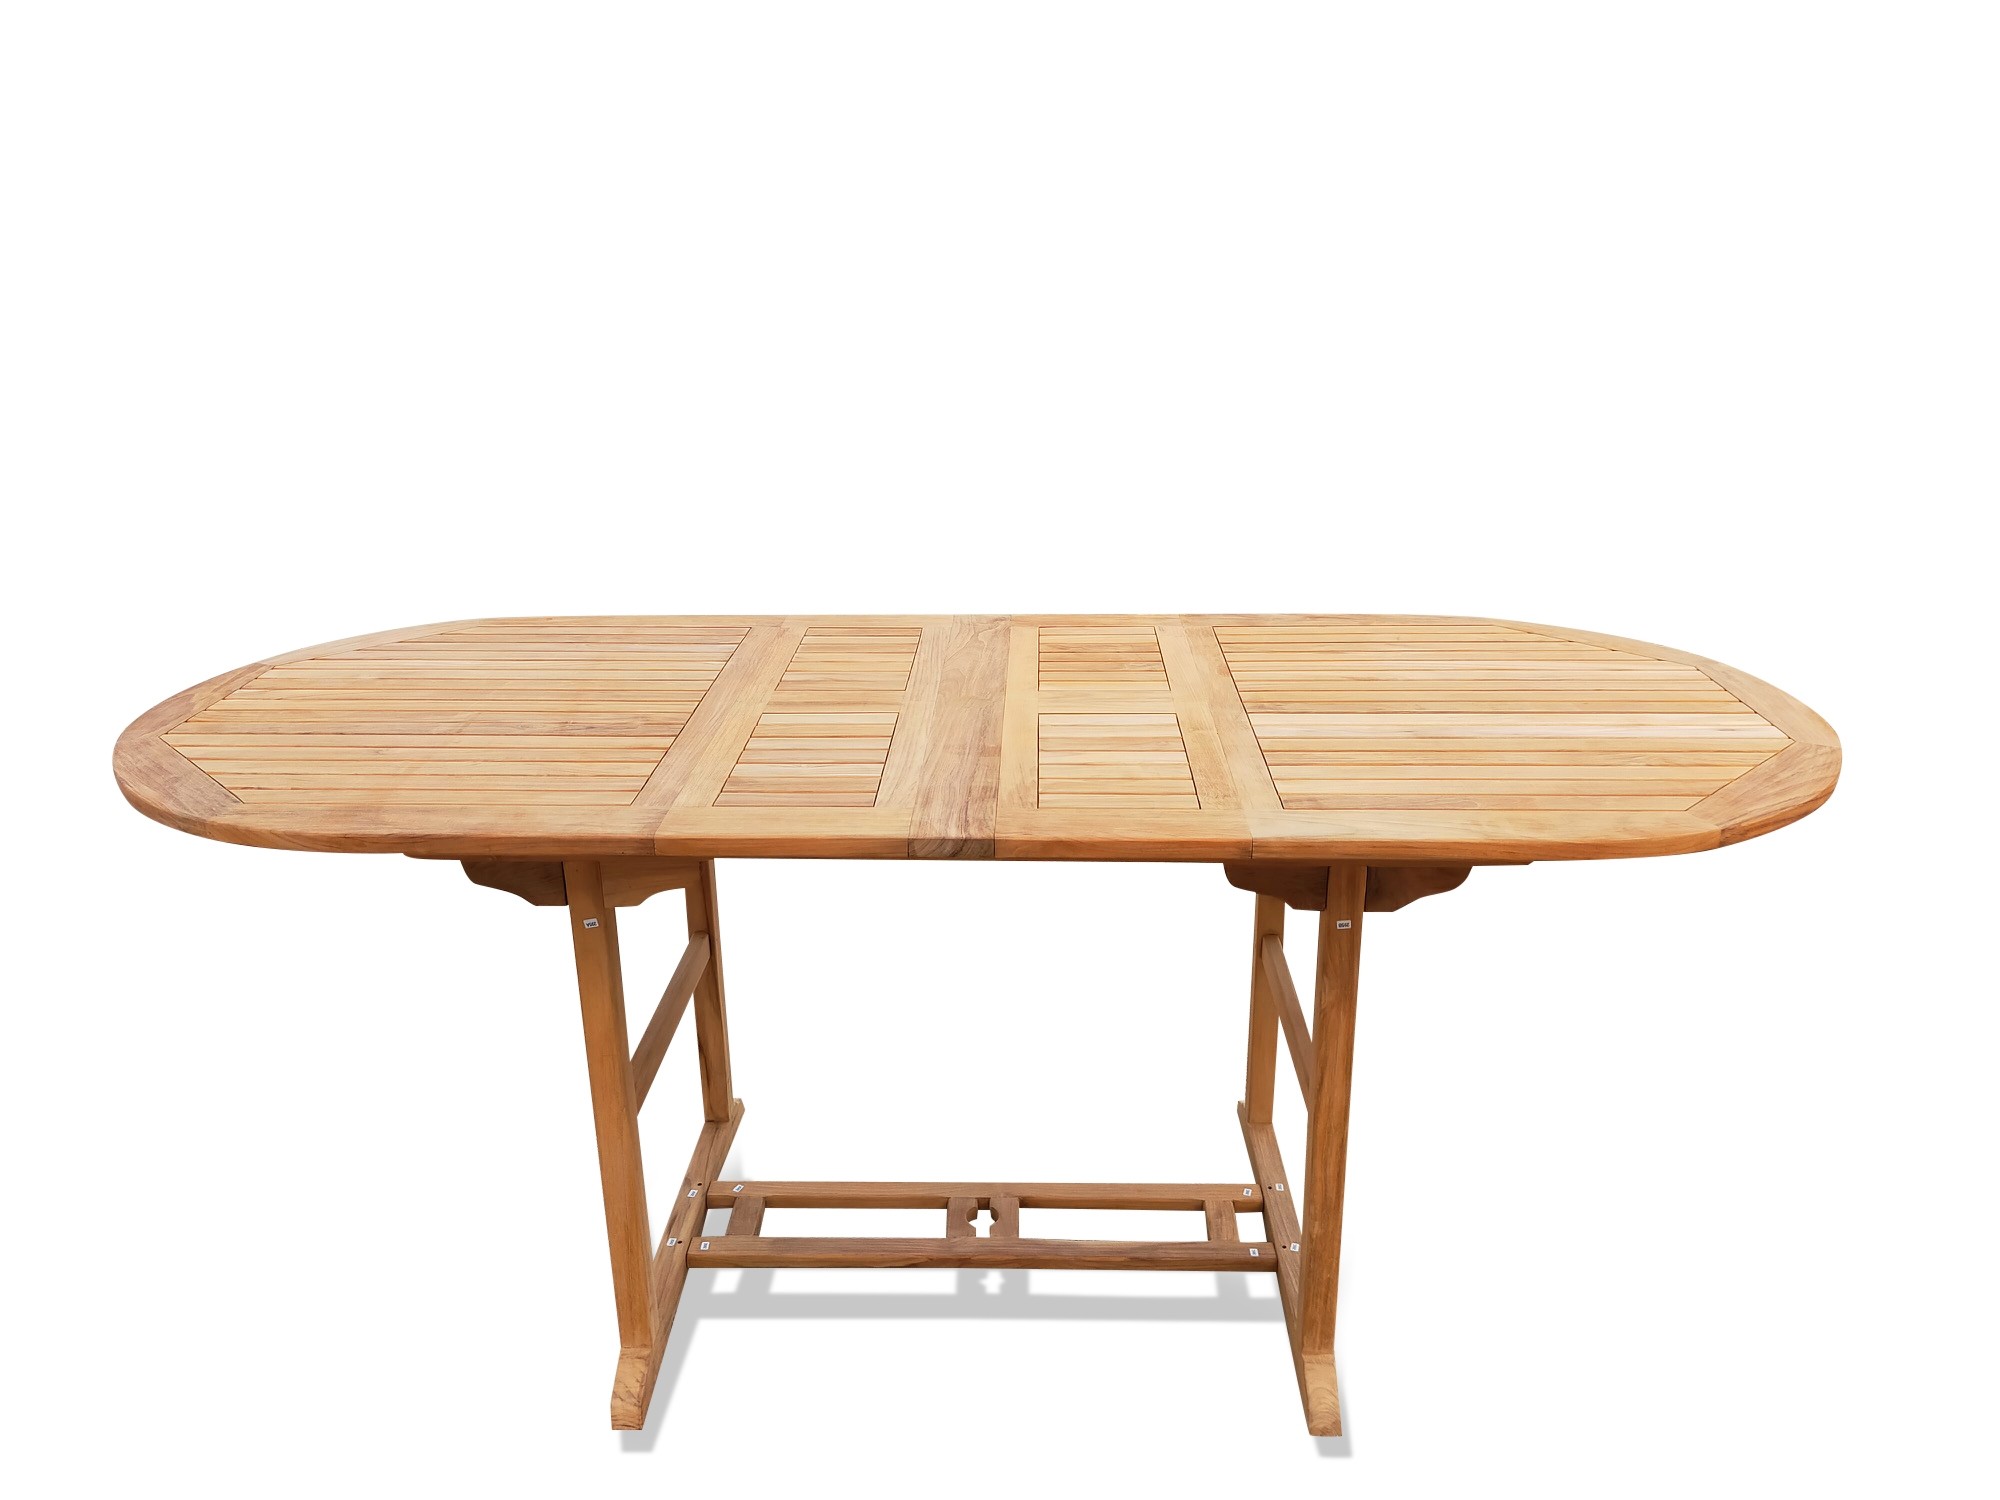 Grade A Teak Bimini Counter Height 95" x 39" Double Leaf Oval Extension Table...Seats 8-10...makes 3 Different Size Tables